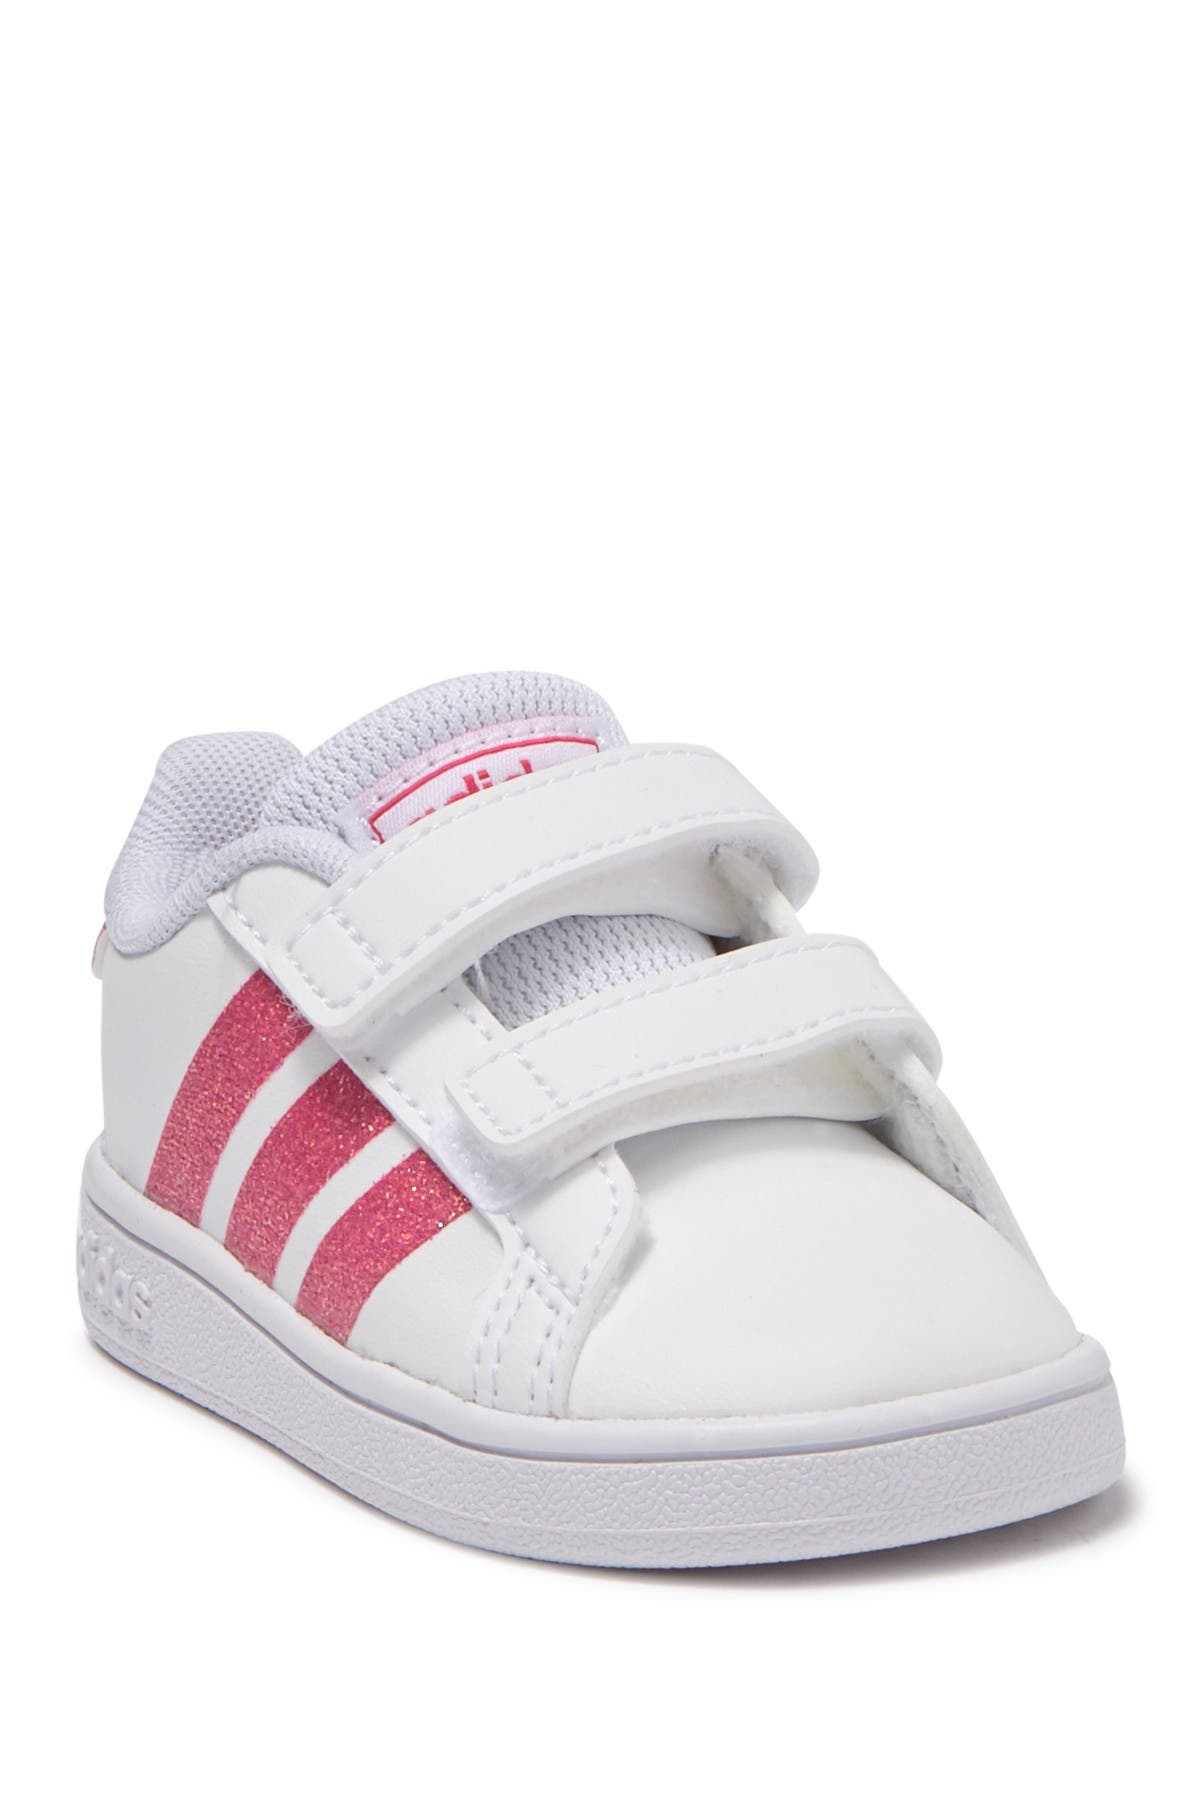 little girl adidas shoes